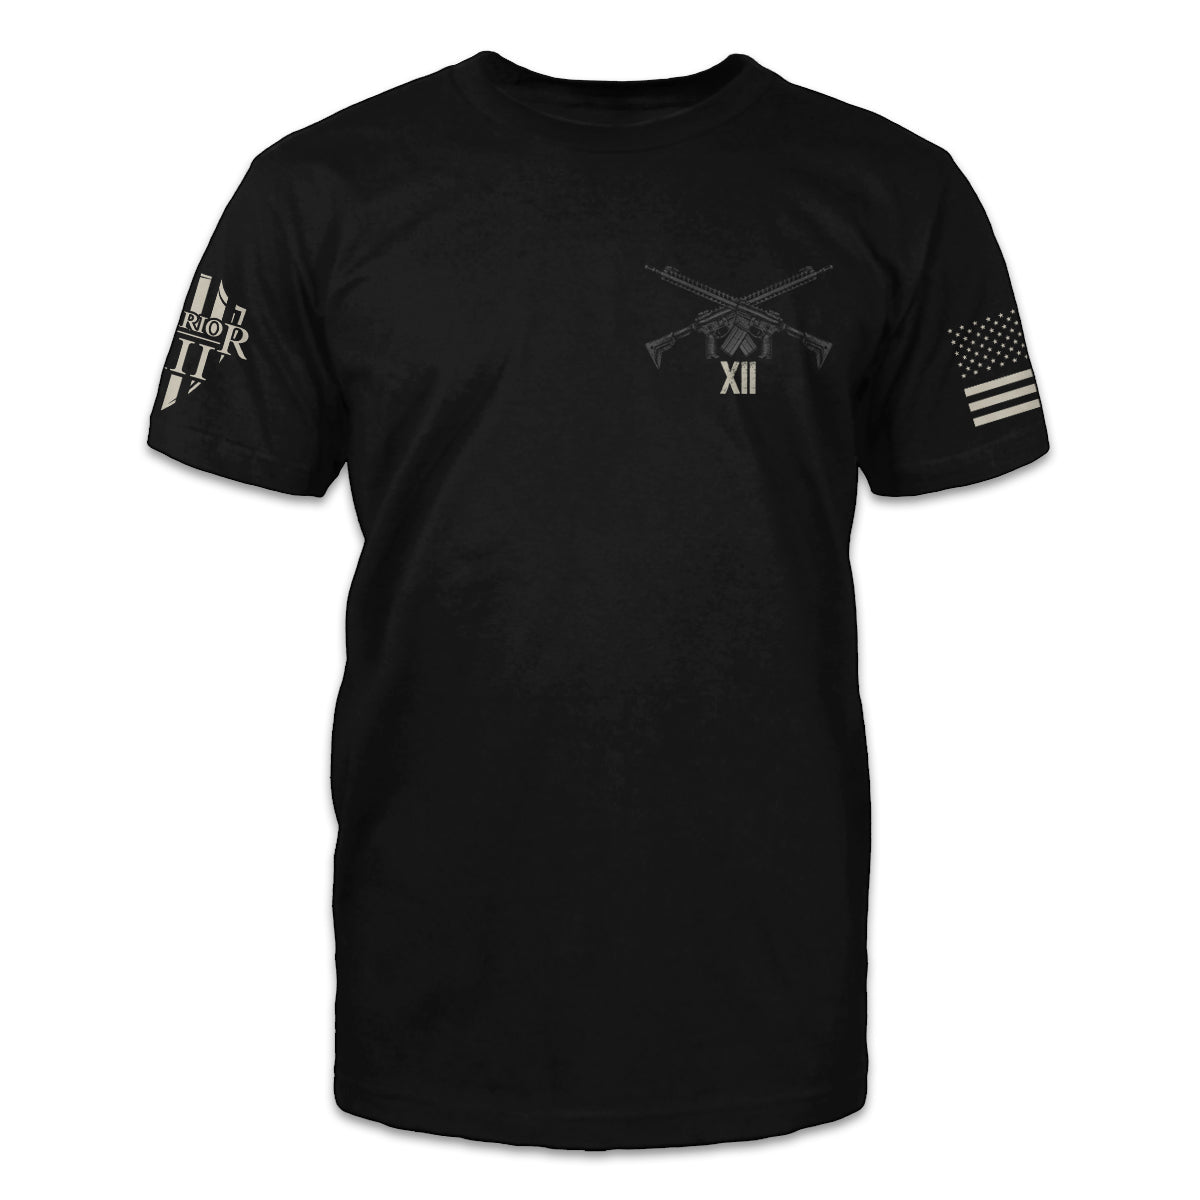 A black t-shirt with two gins crossed over printed on the front of the shirt.